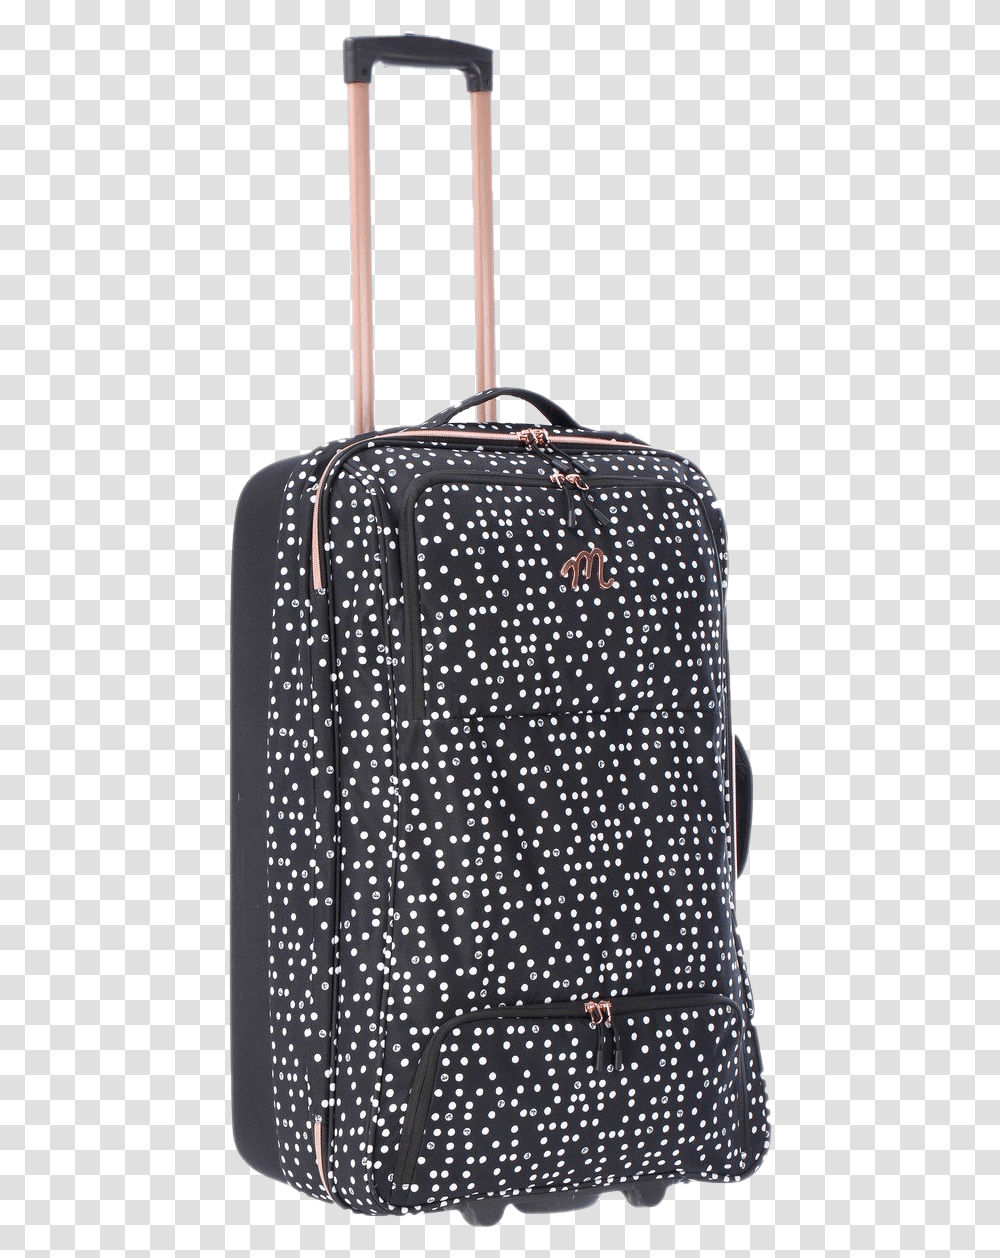 Black Suitcase Clipart Background Mambo Suitcase, Luggage, Backpack, Bag Transparent Png